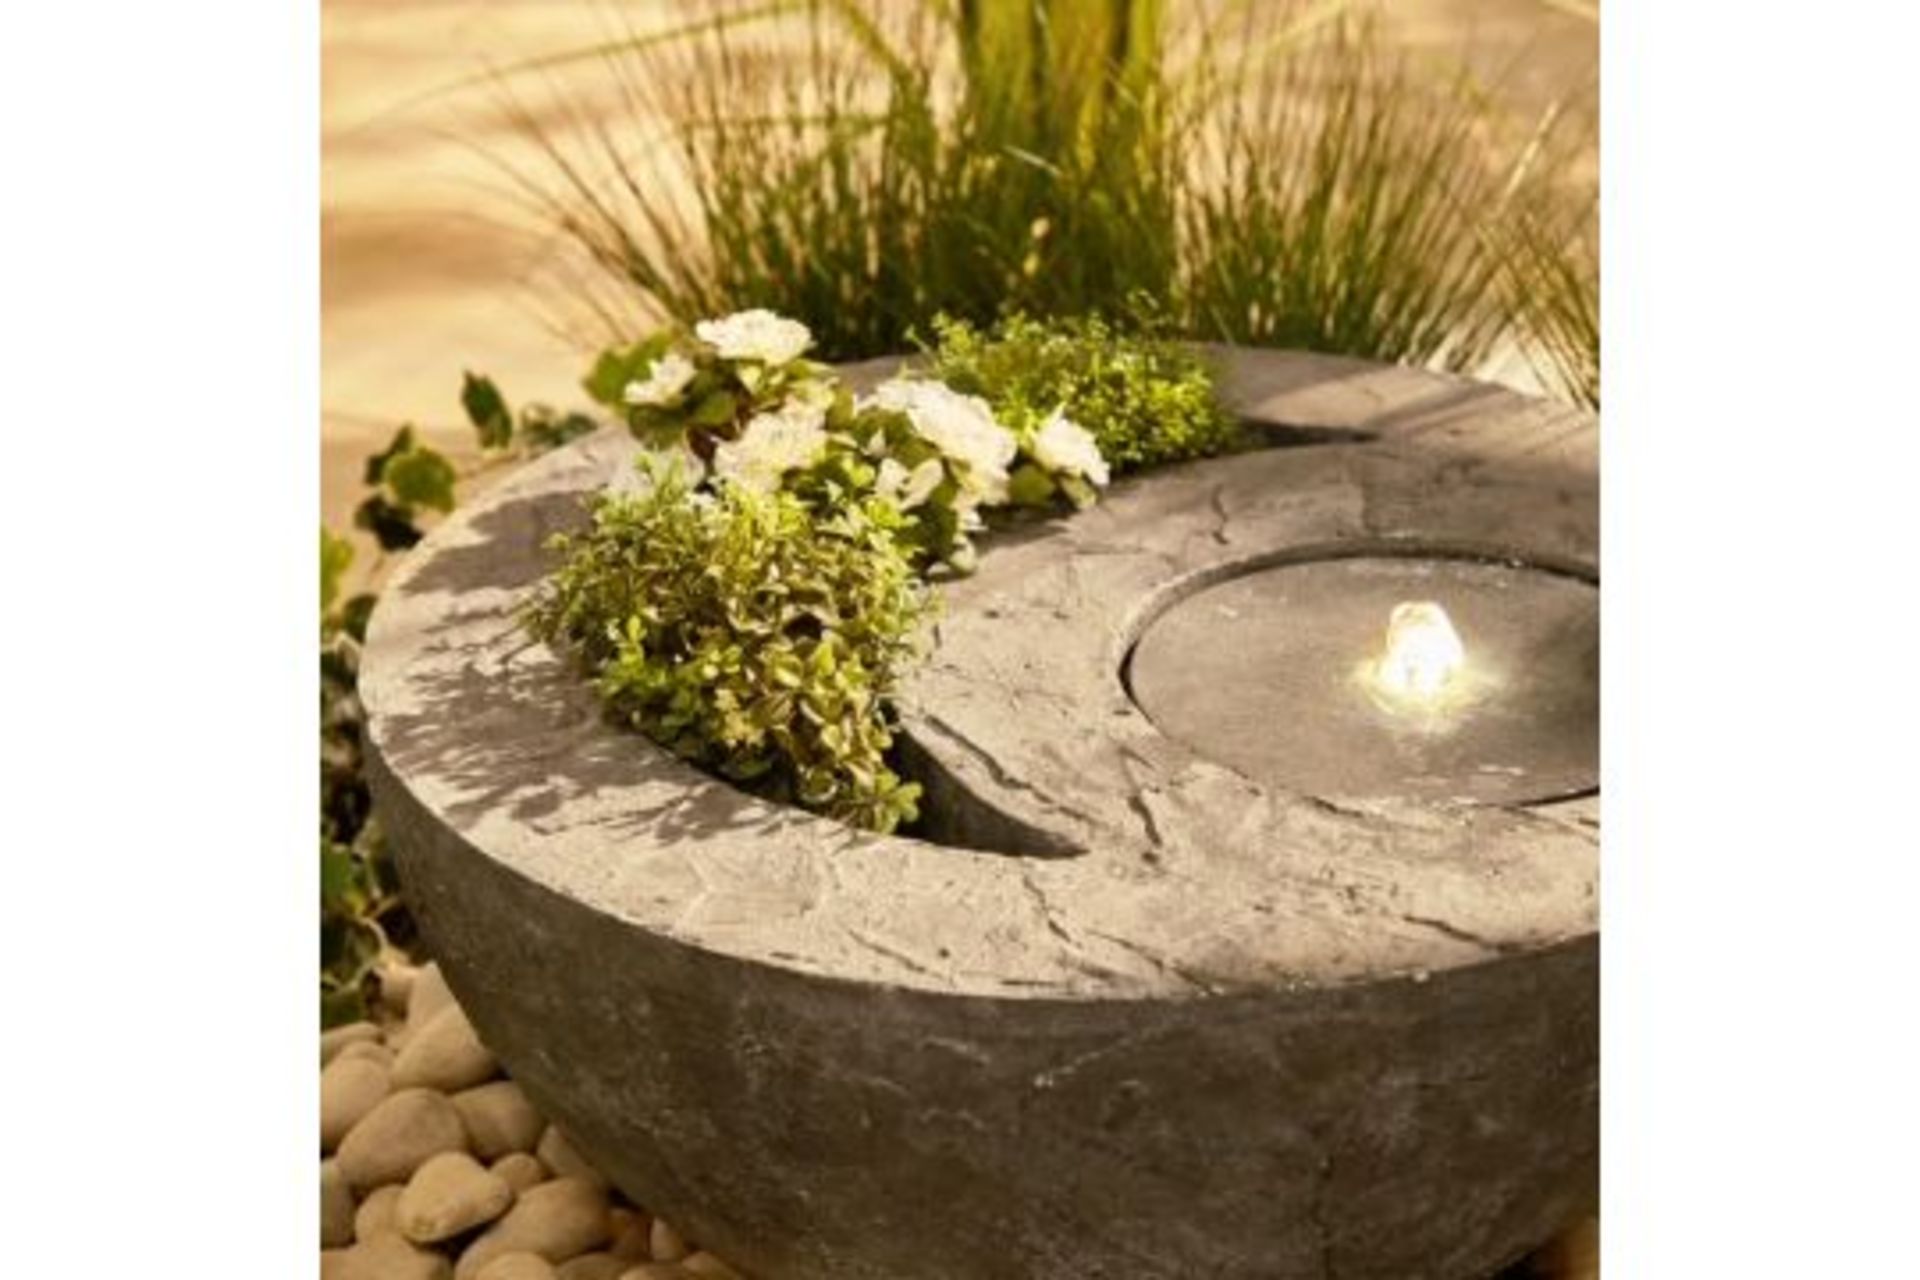 New & Boxed Dual Water Feature and Planter - Garden Bowl Design Planter, Indoor/Outdoor LED Lights - Image 5 of 6